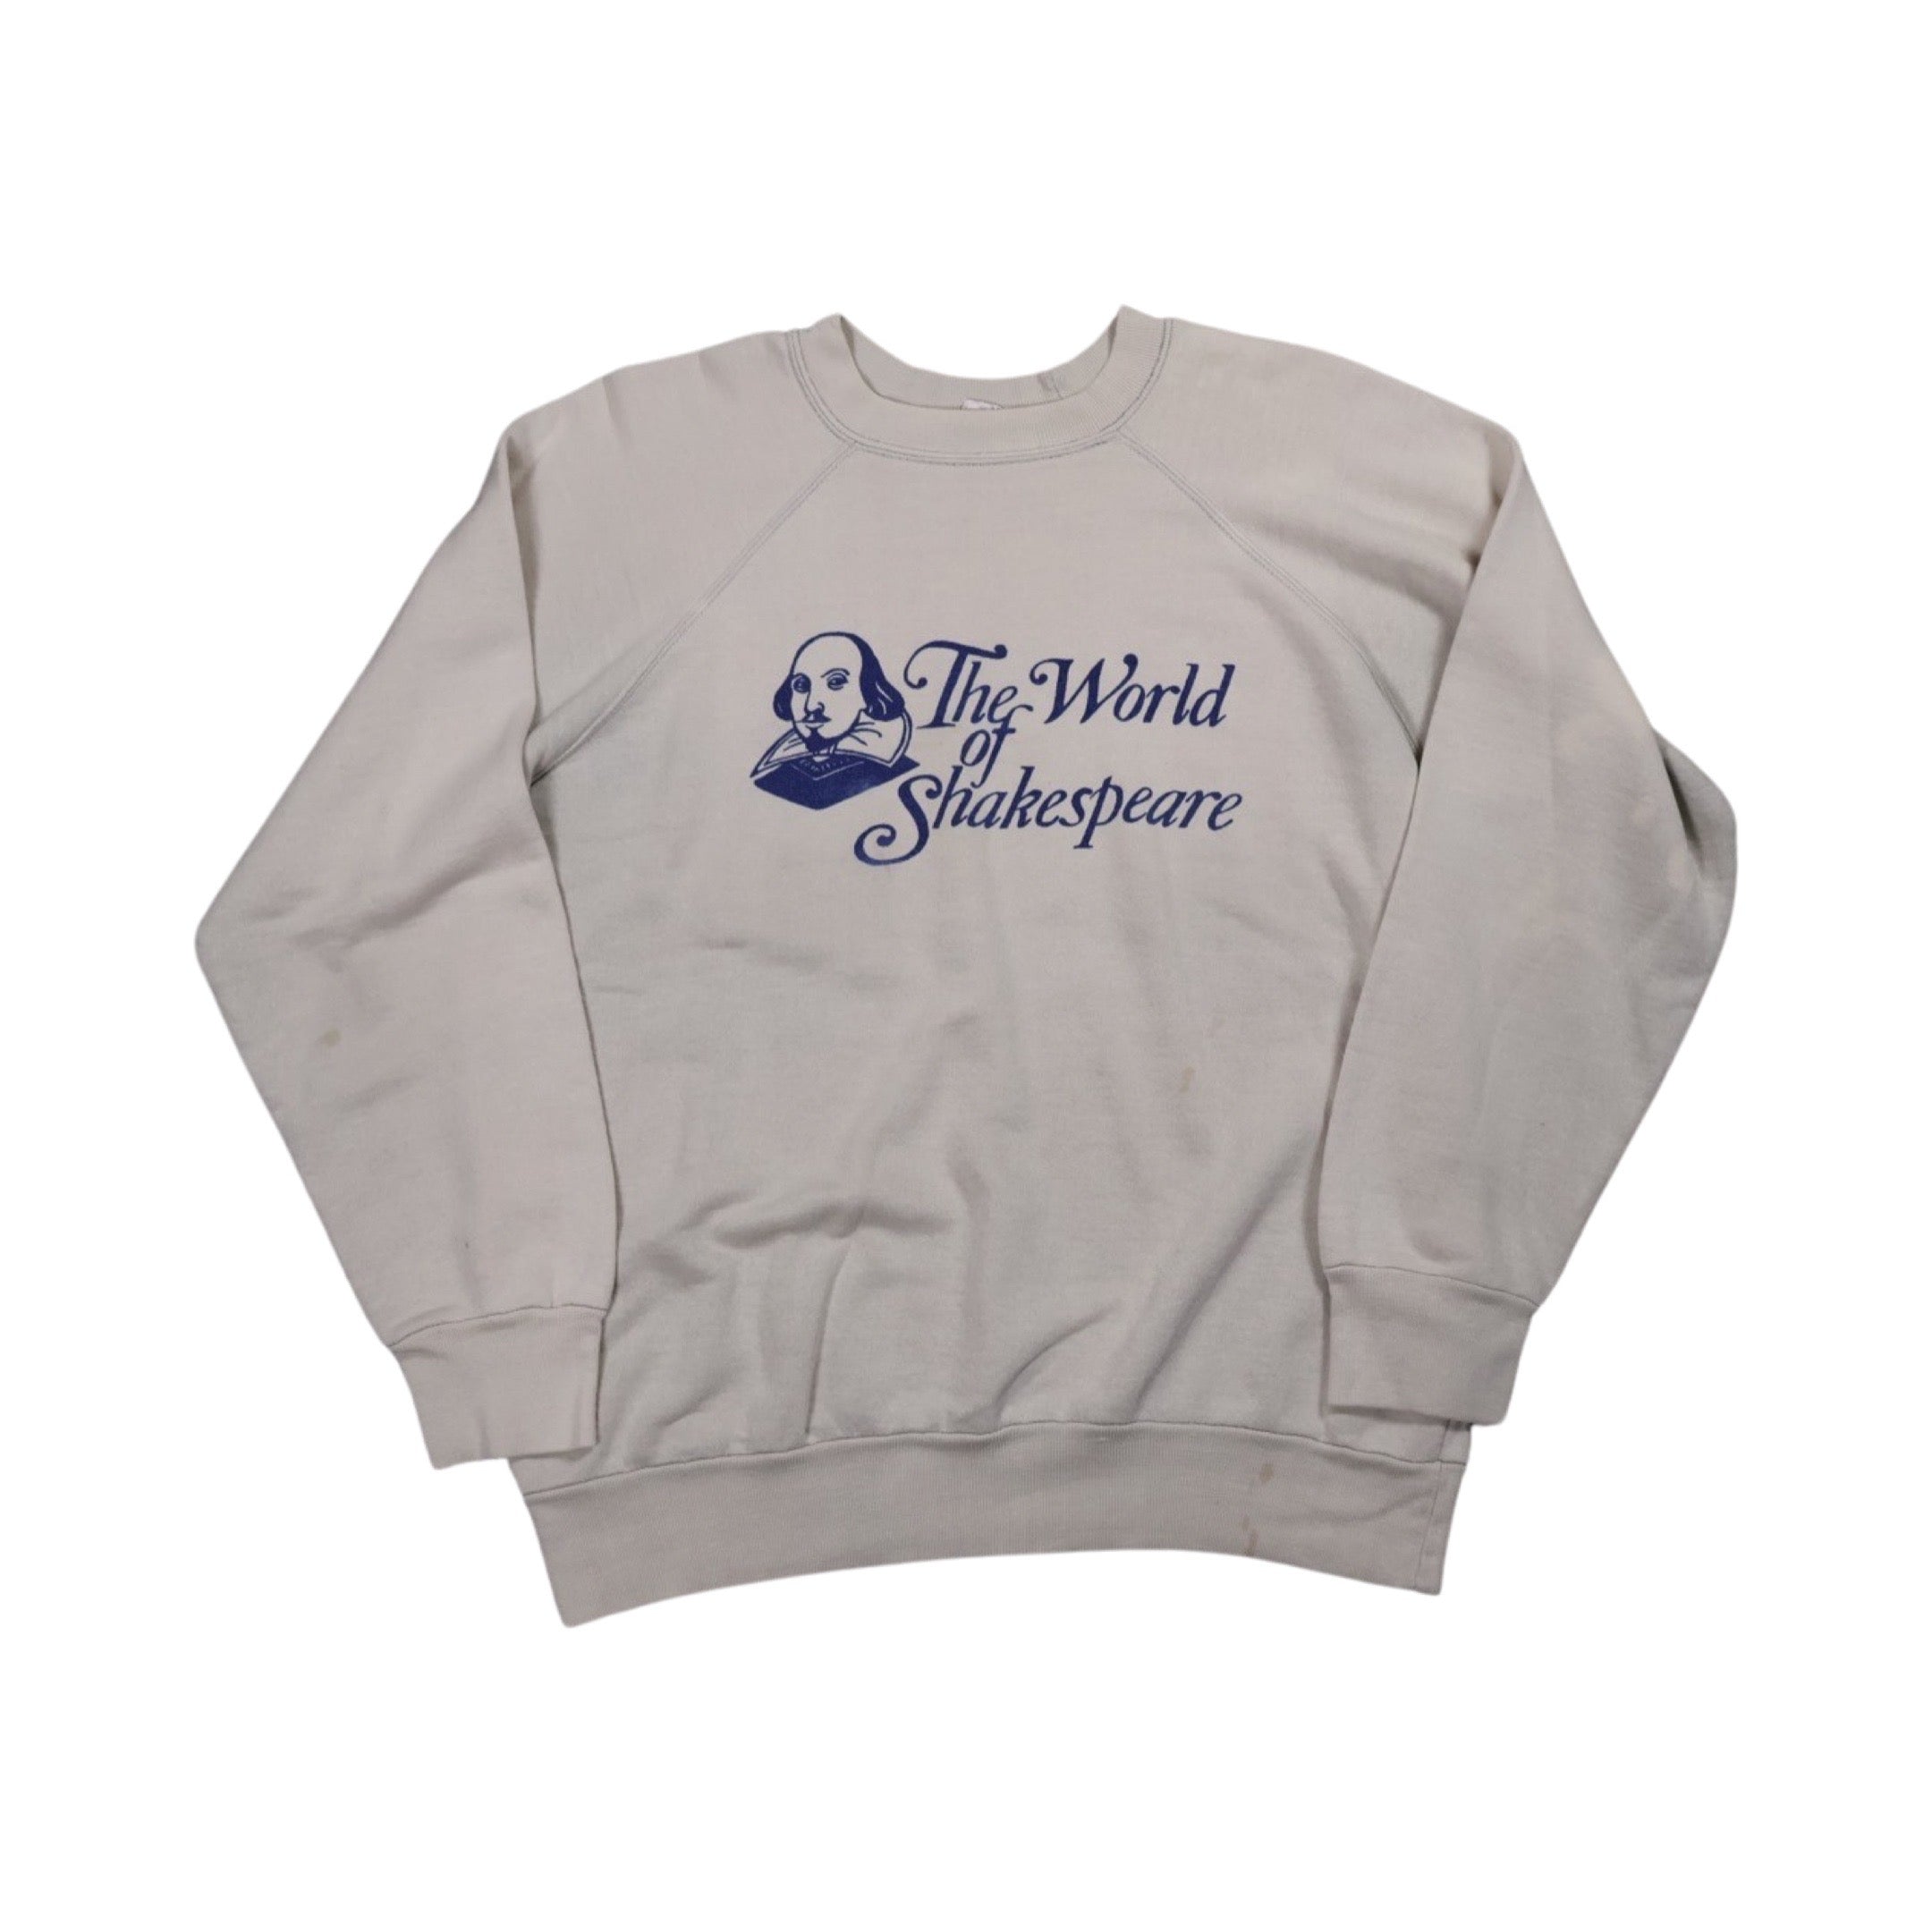 The World of Shakespeare 80s Sweater (Small)